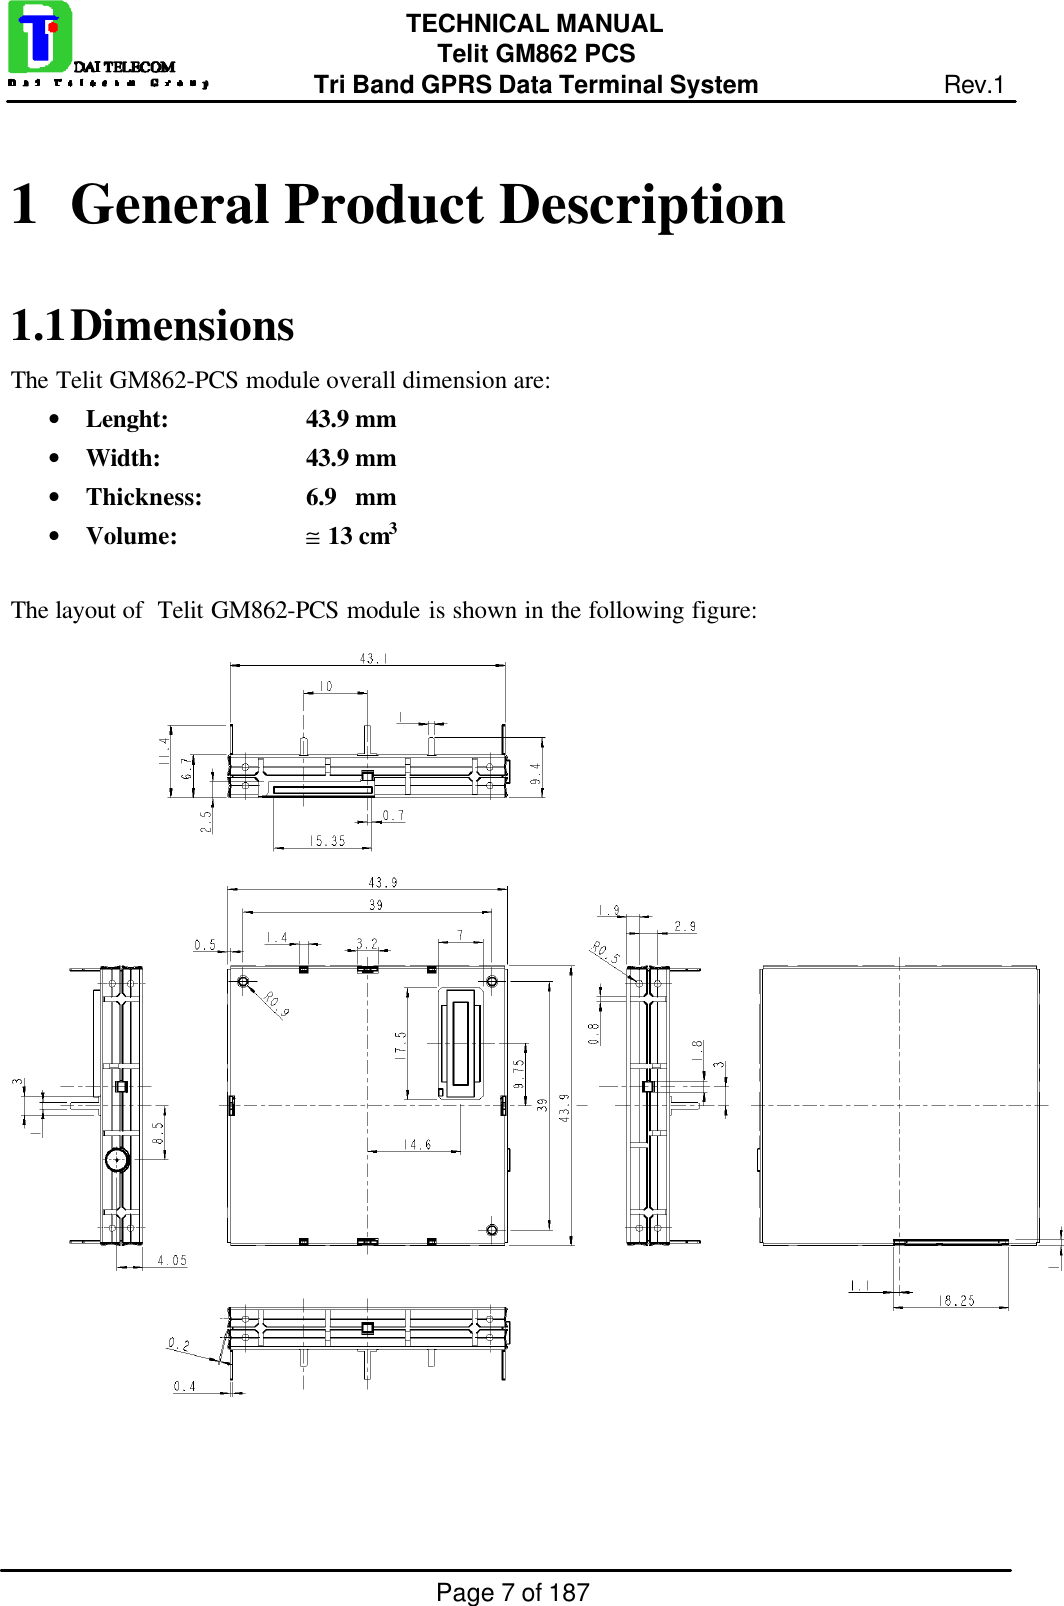 Page 7 of 187TECHNICAL MANUALTelit GM862 PCSTri Band GPRS Data Terminal System Rev.11  General Product Description1.1 DimensionsThe Telit GM862-PCS module overall dimension are:• Lenght:  43.9 mm• Width:  43.9 mm• Thickness:  6.9   mm• Volume: ≅ 13 cm3The layout of  Telit GM862-PCS module is shown in the following figure: